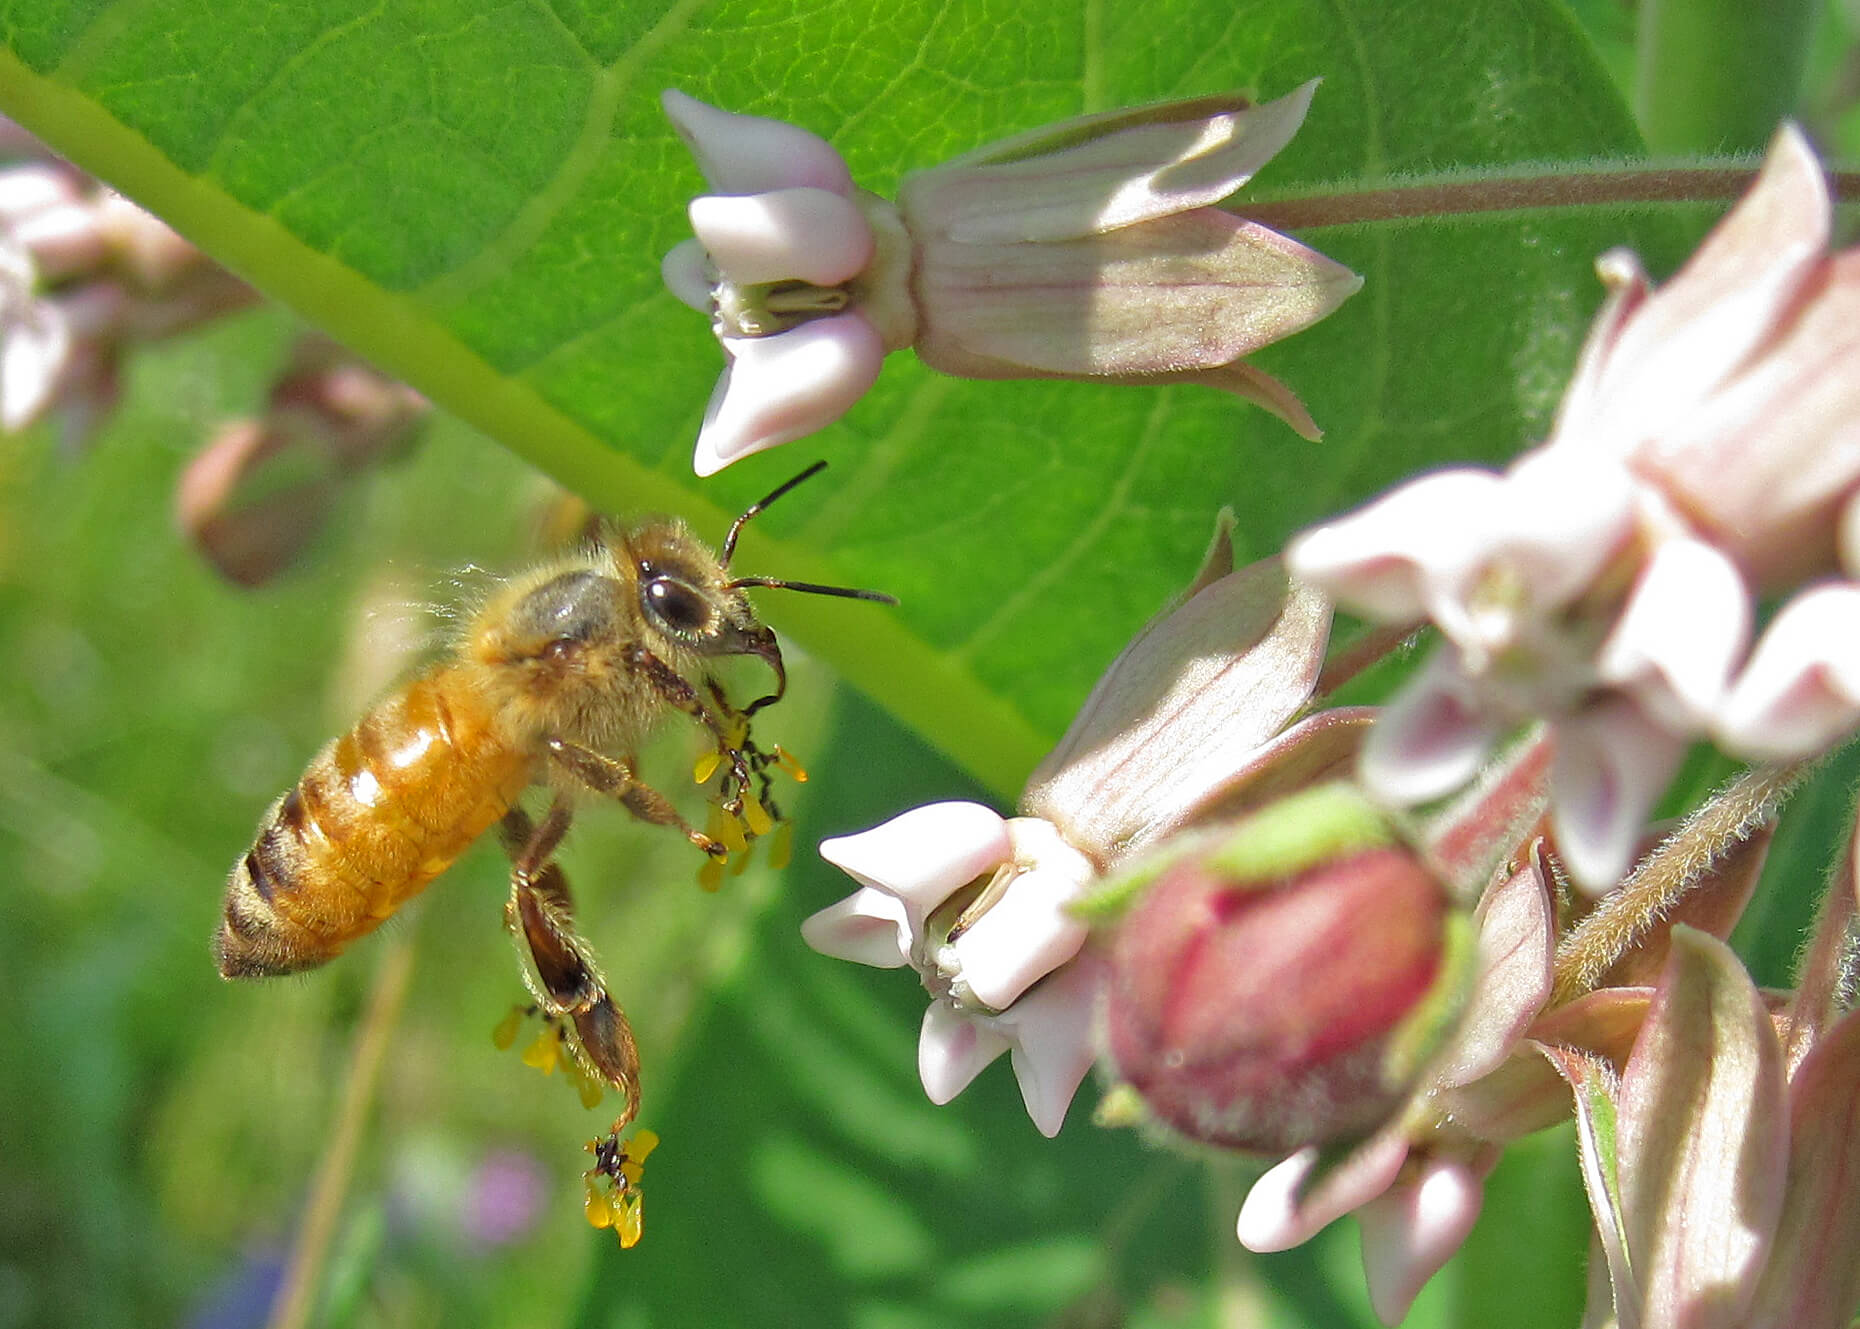 A honeybee carries a heavy load of pollinia, that have even managed to stick to its tongue